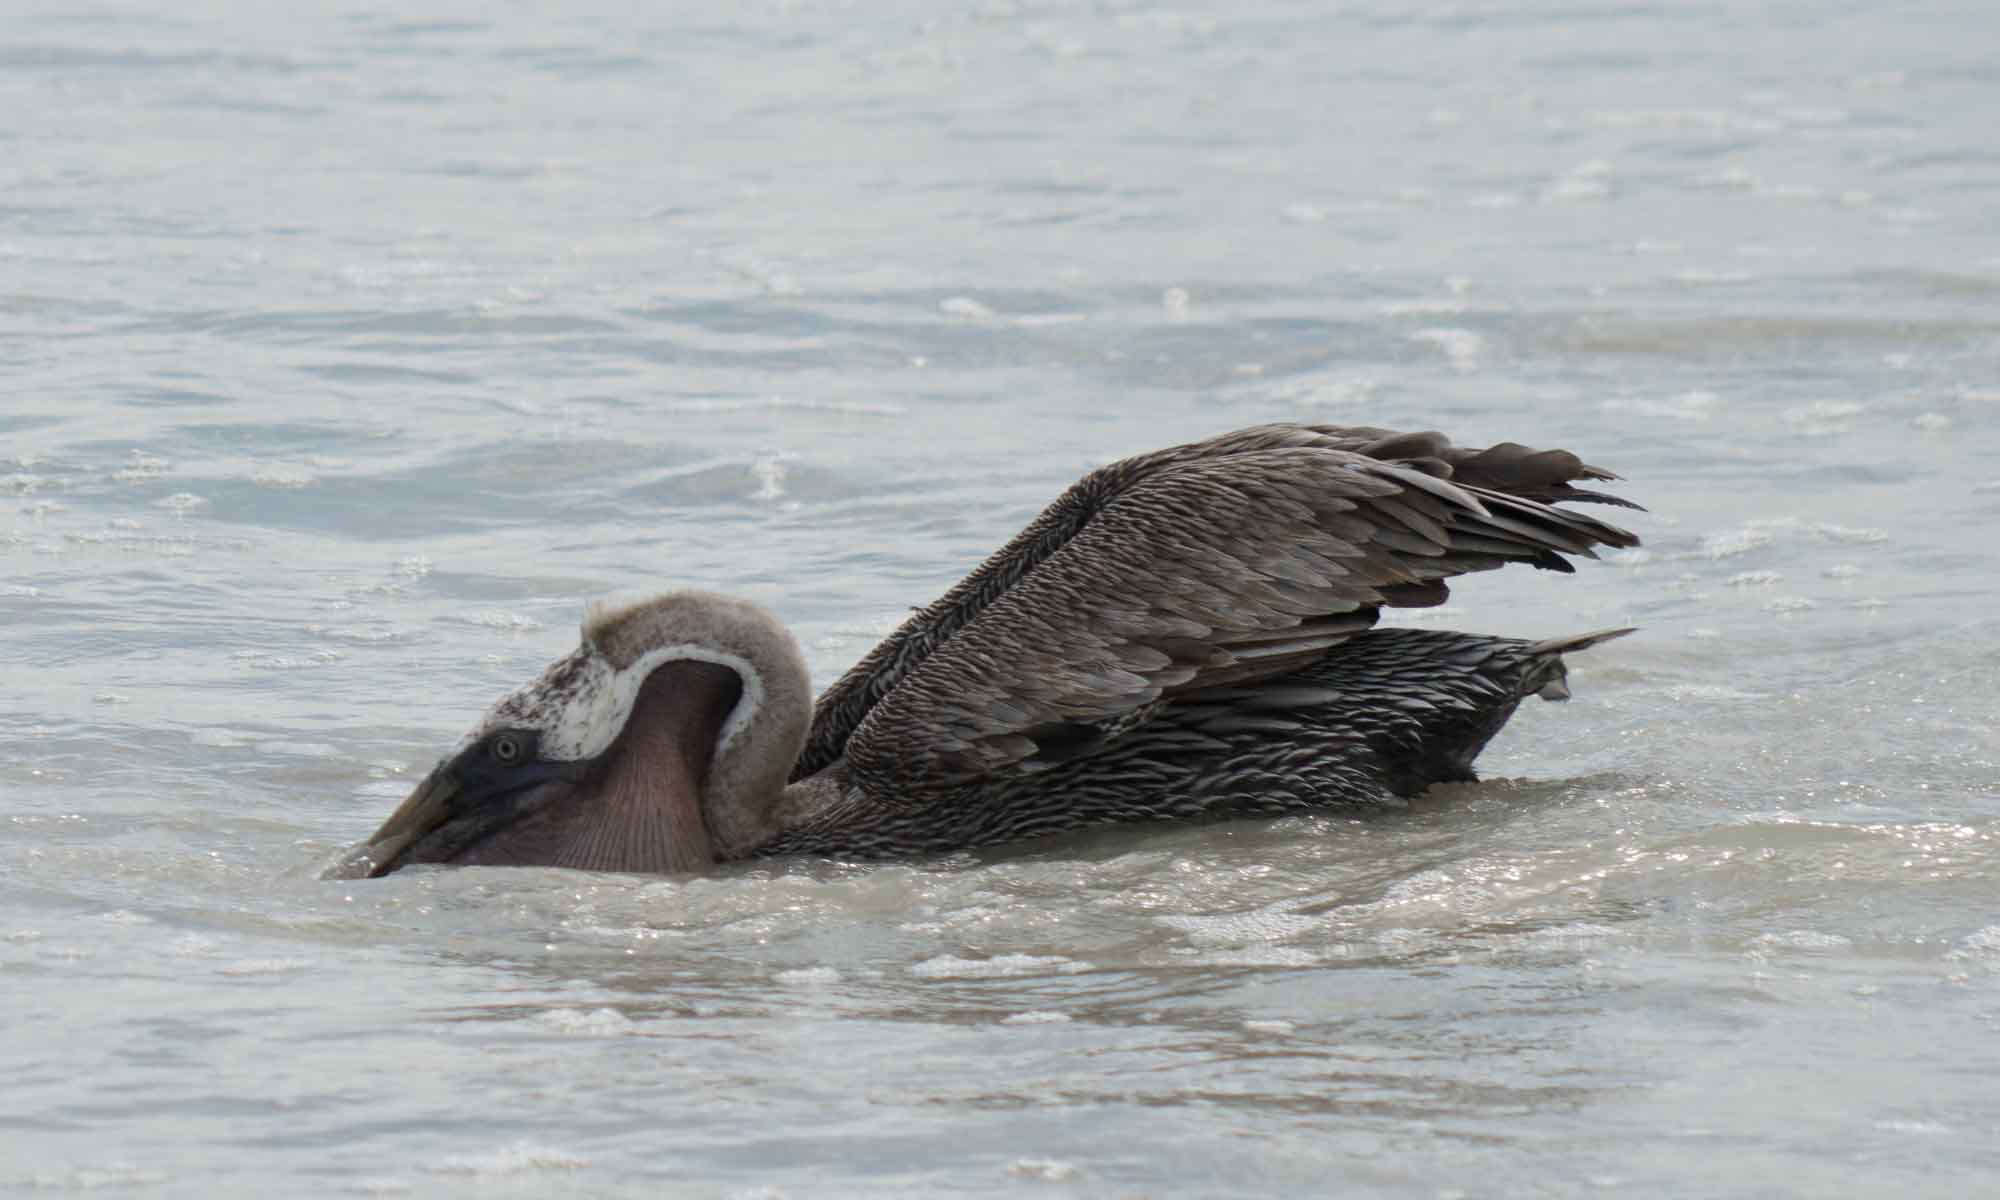 A pelican grabbing some seafood